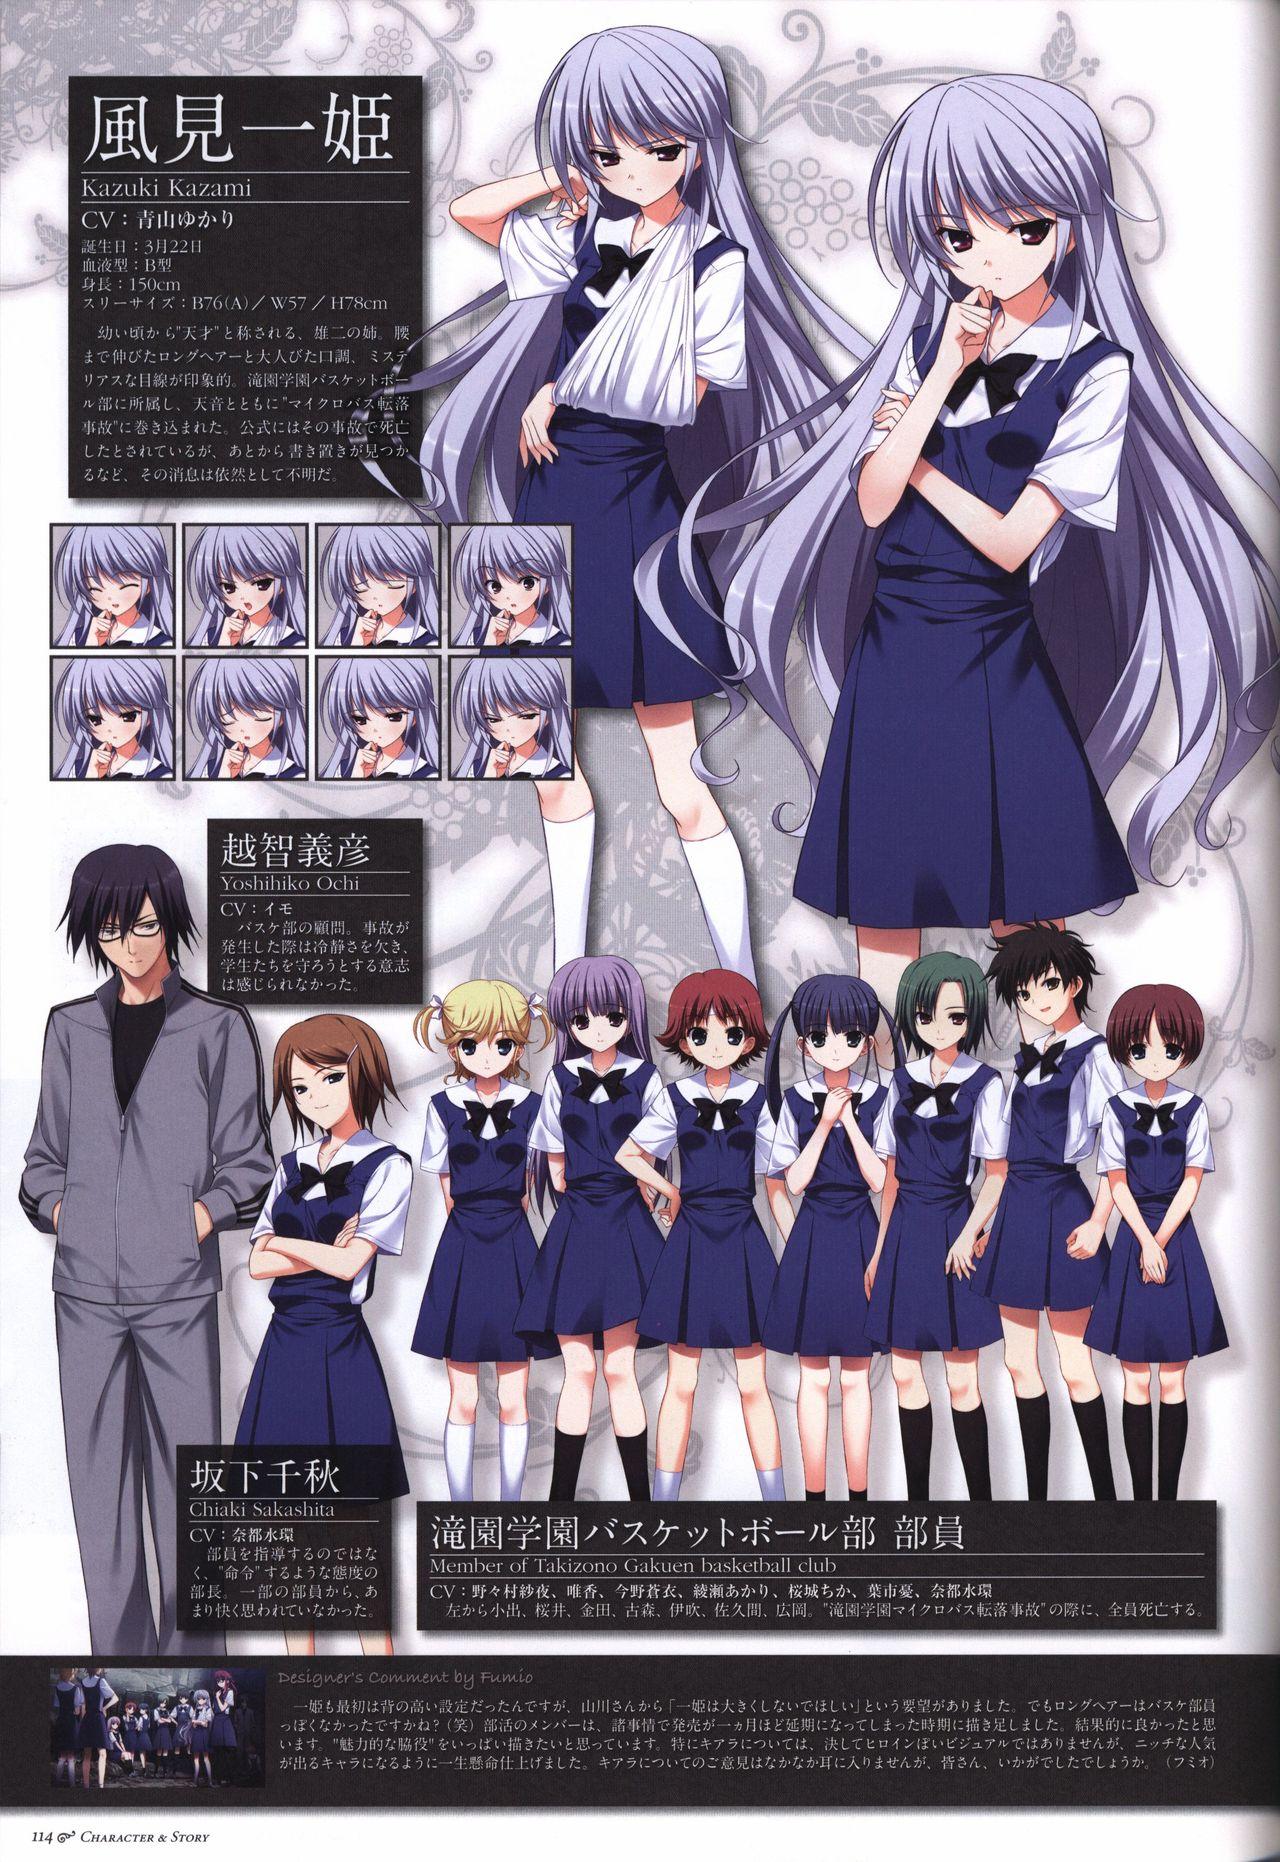 The Fruit of Grisaia Visual FanBook 114